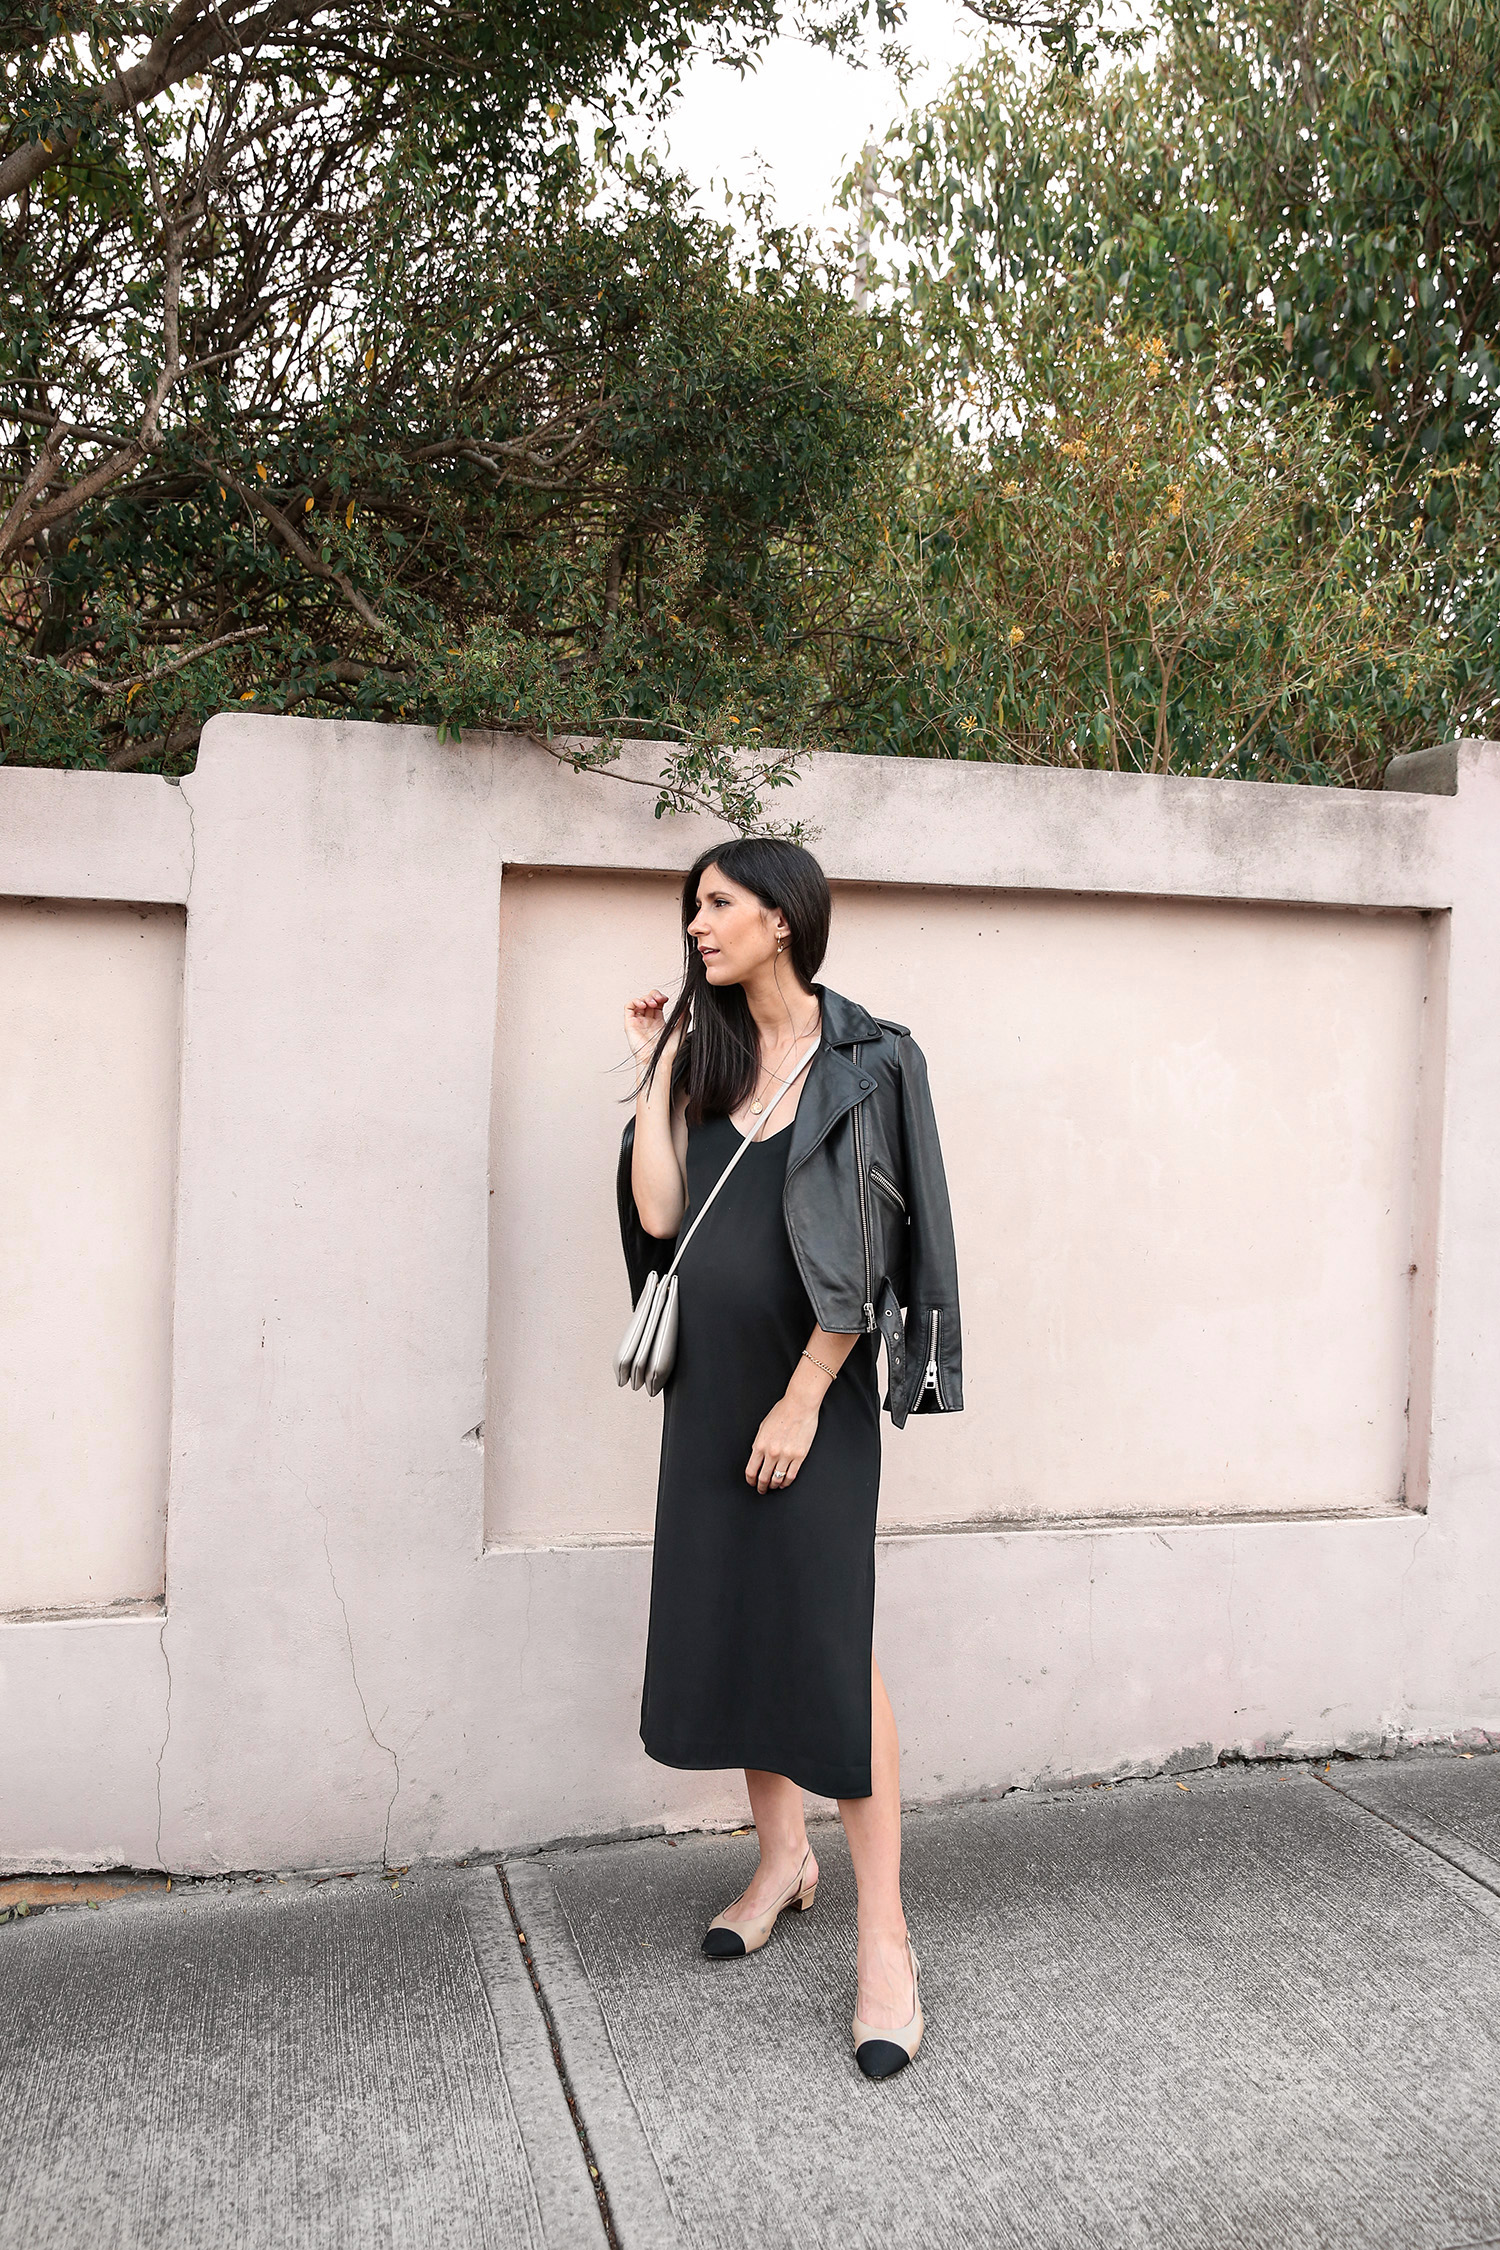 Jamie Lee of Mademoiselle wearing a minimal all black outfit